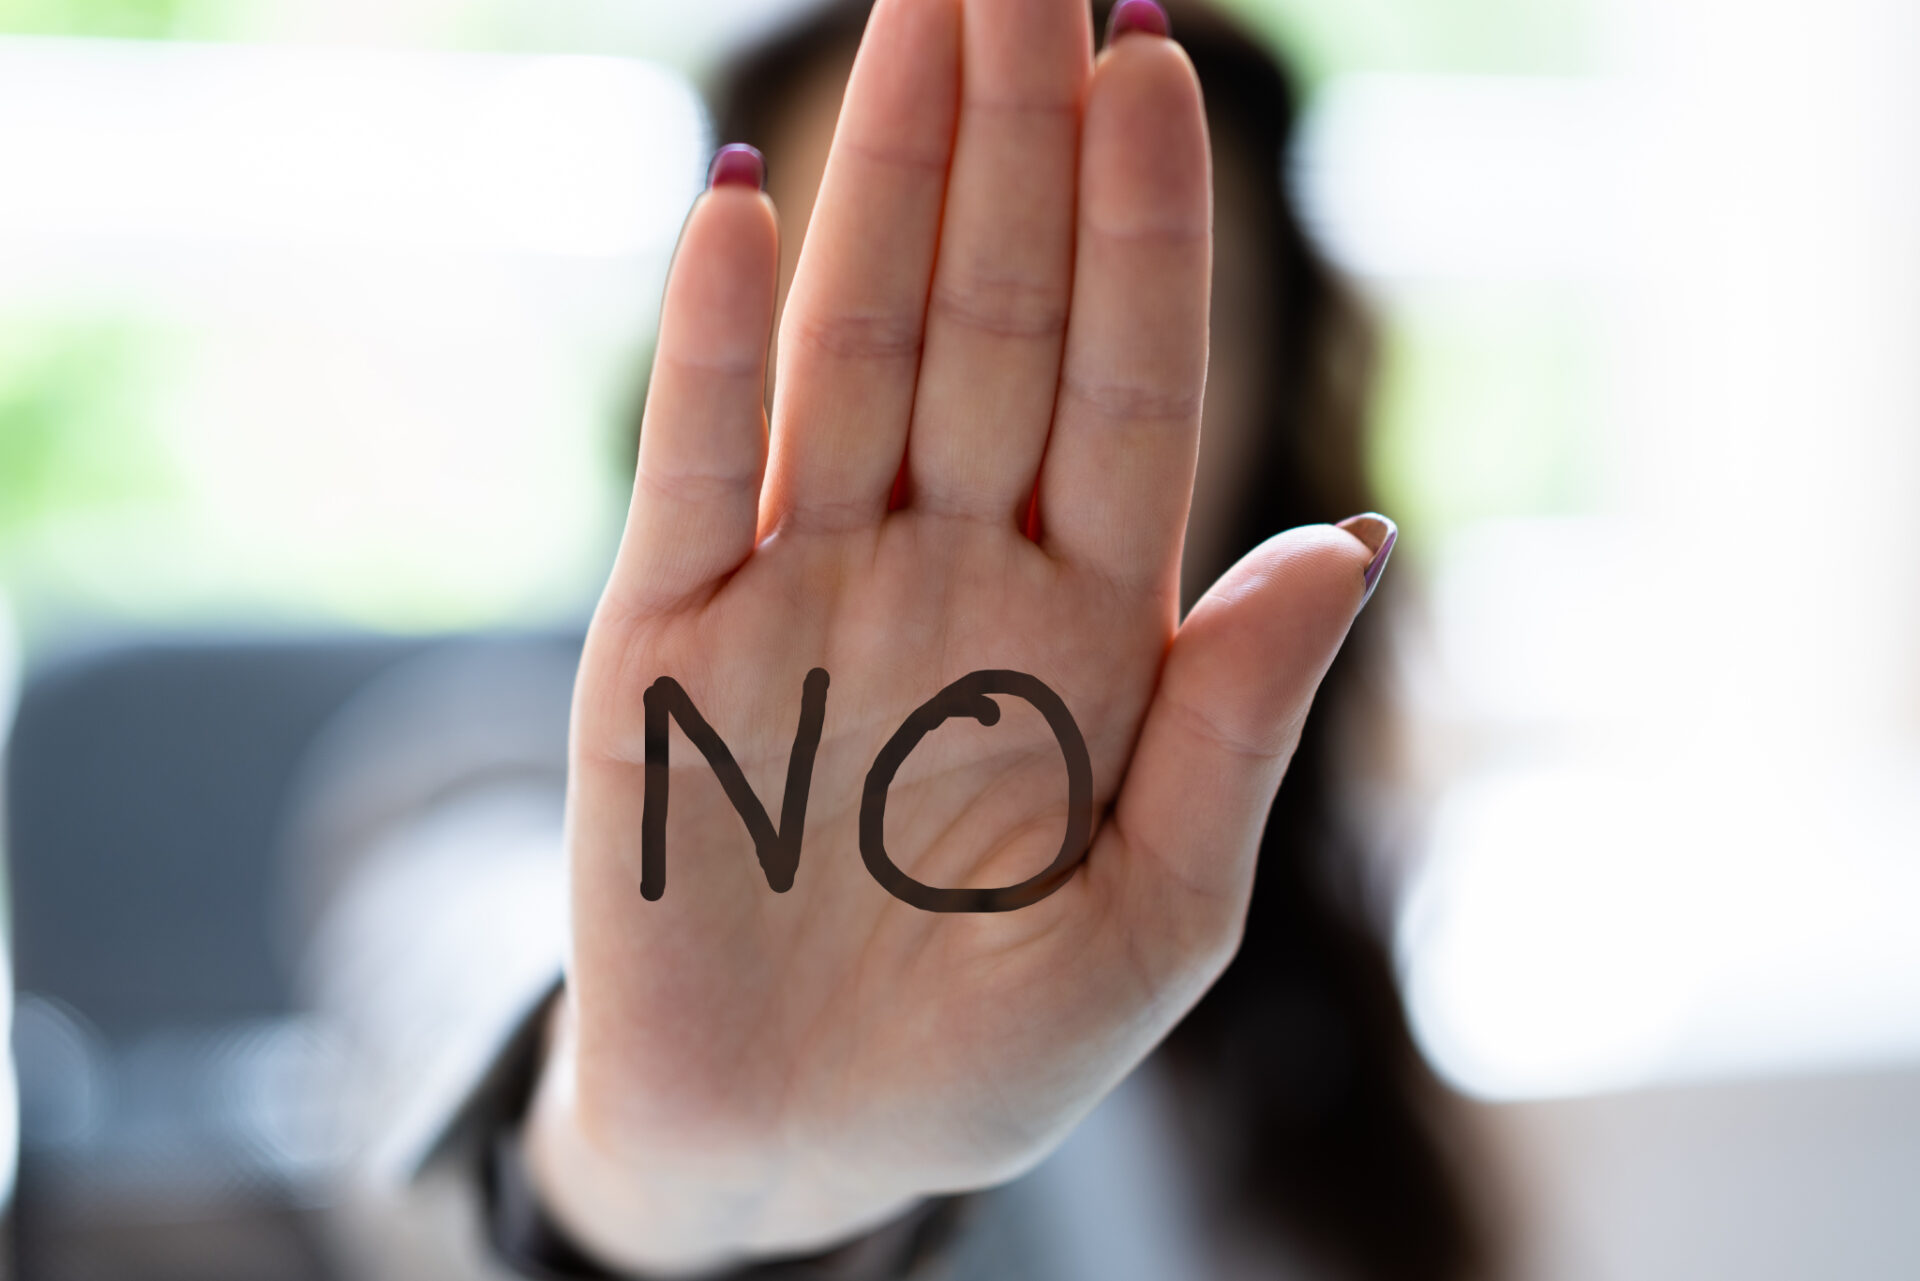 The Art of Saying No Without Saying No